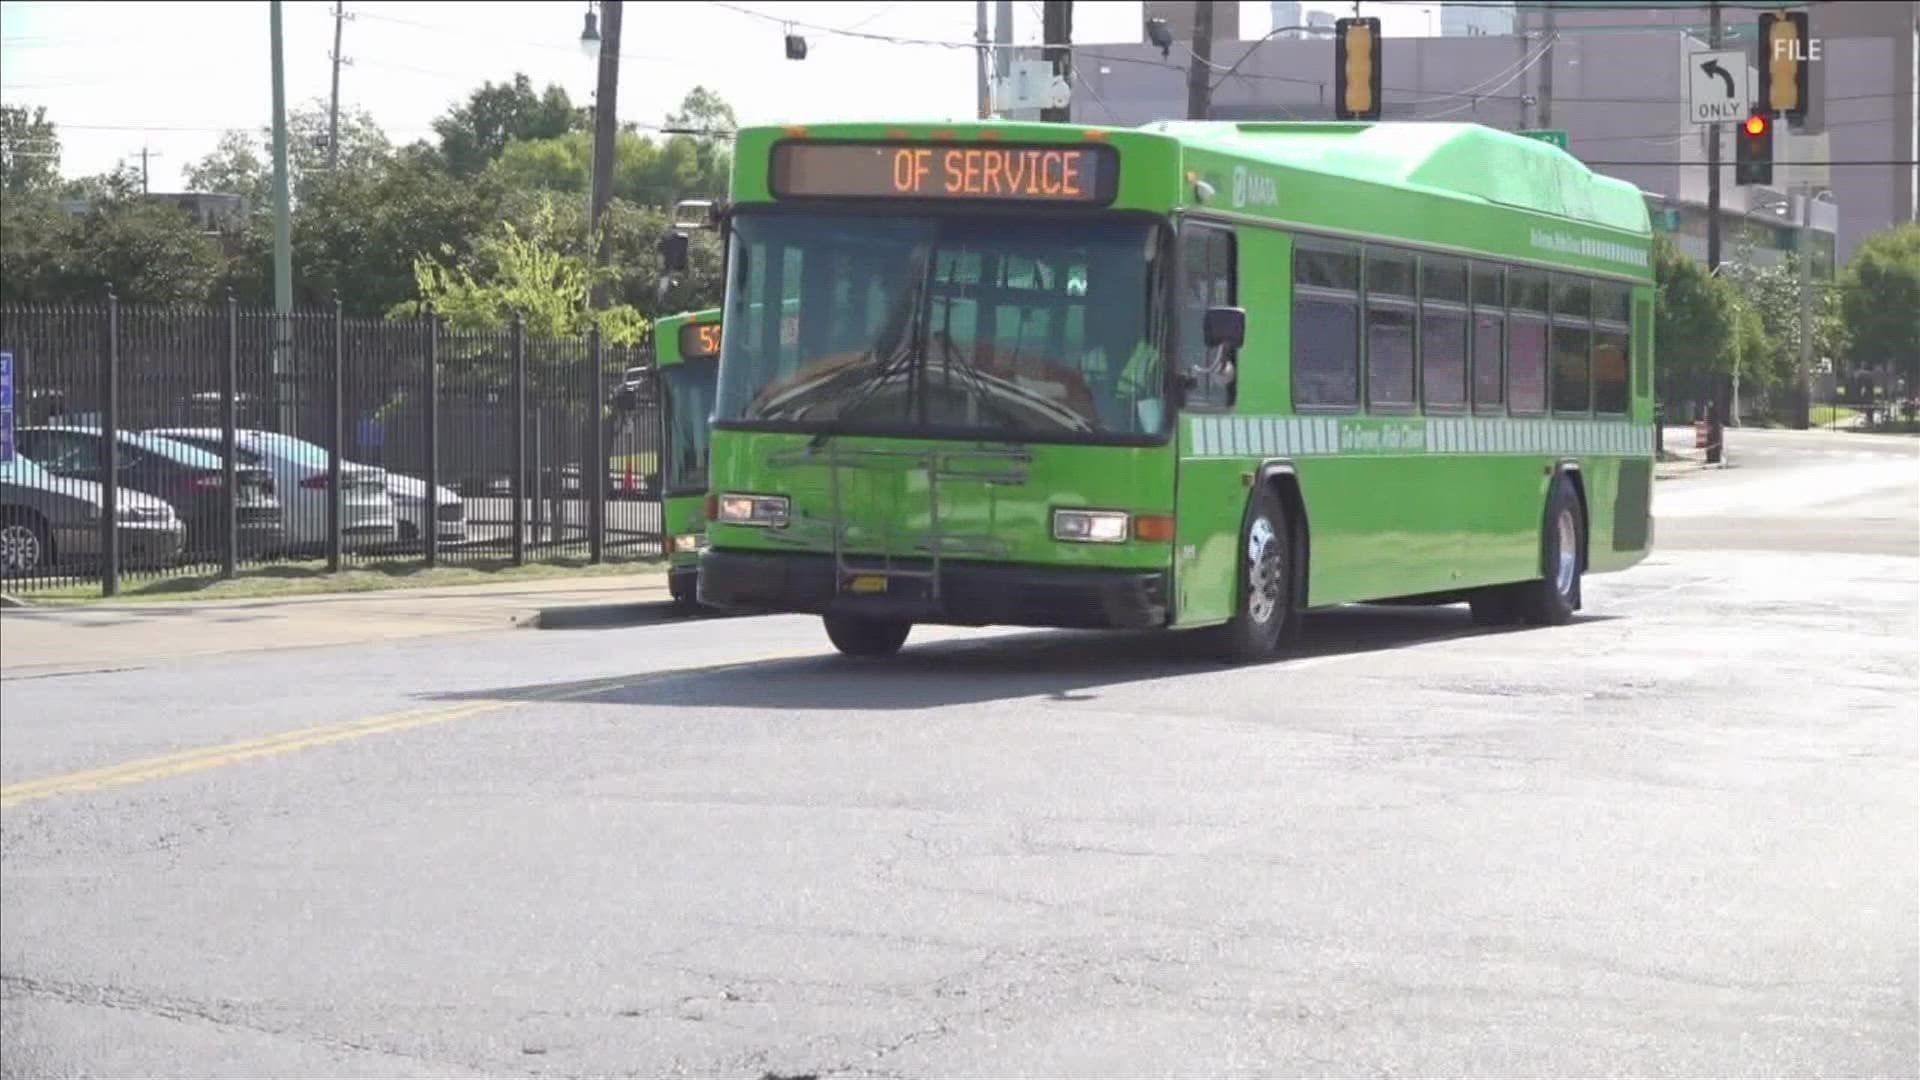 MATA ended service to West Memphis back in 2018 due to low ridership.